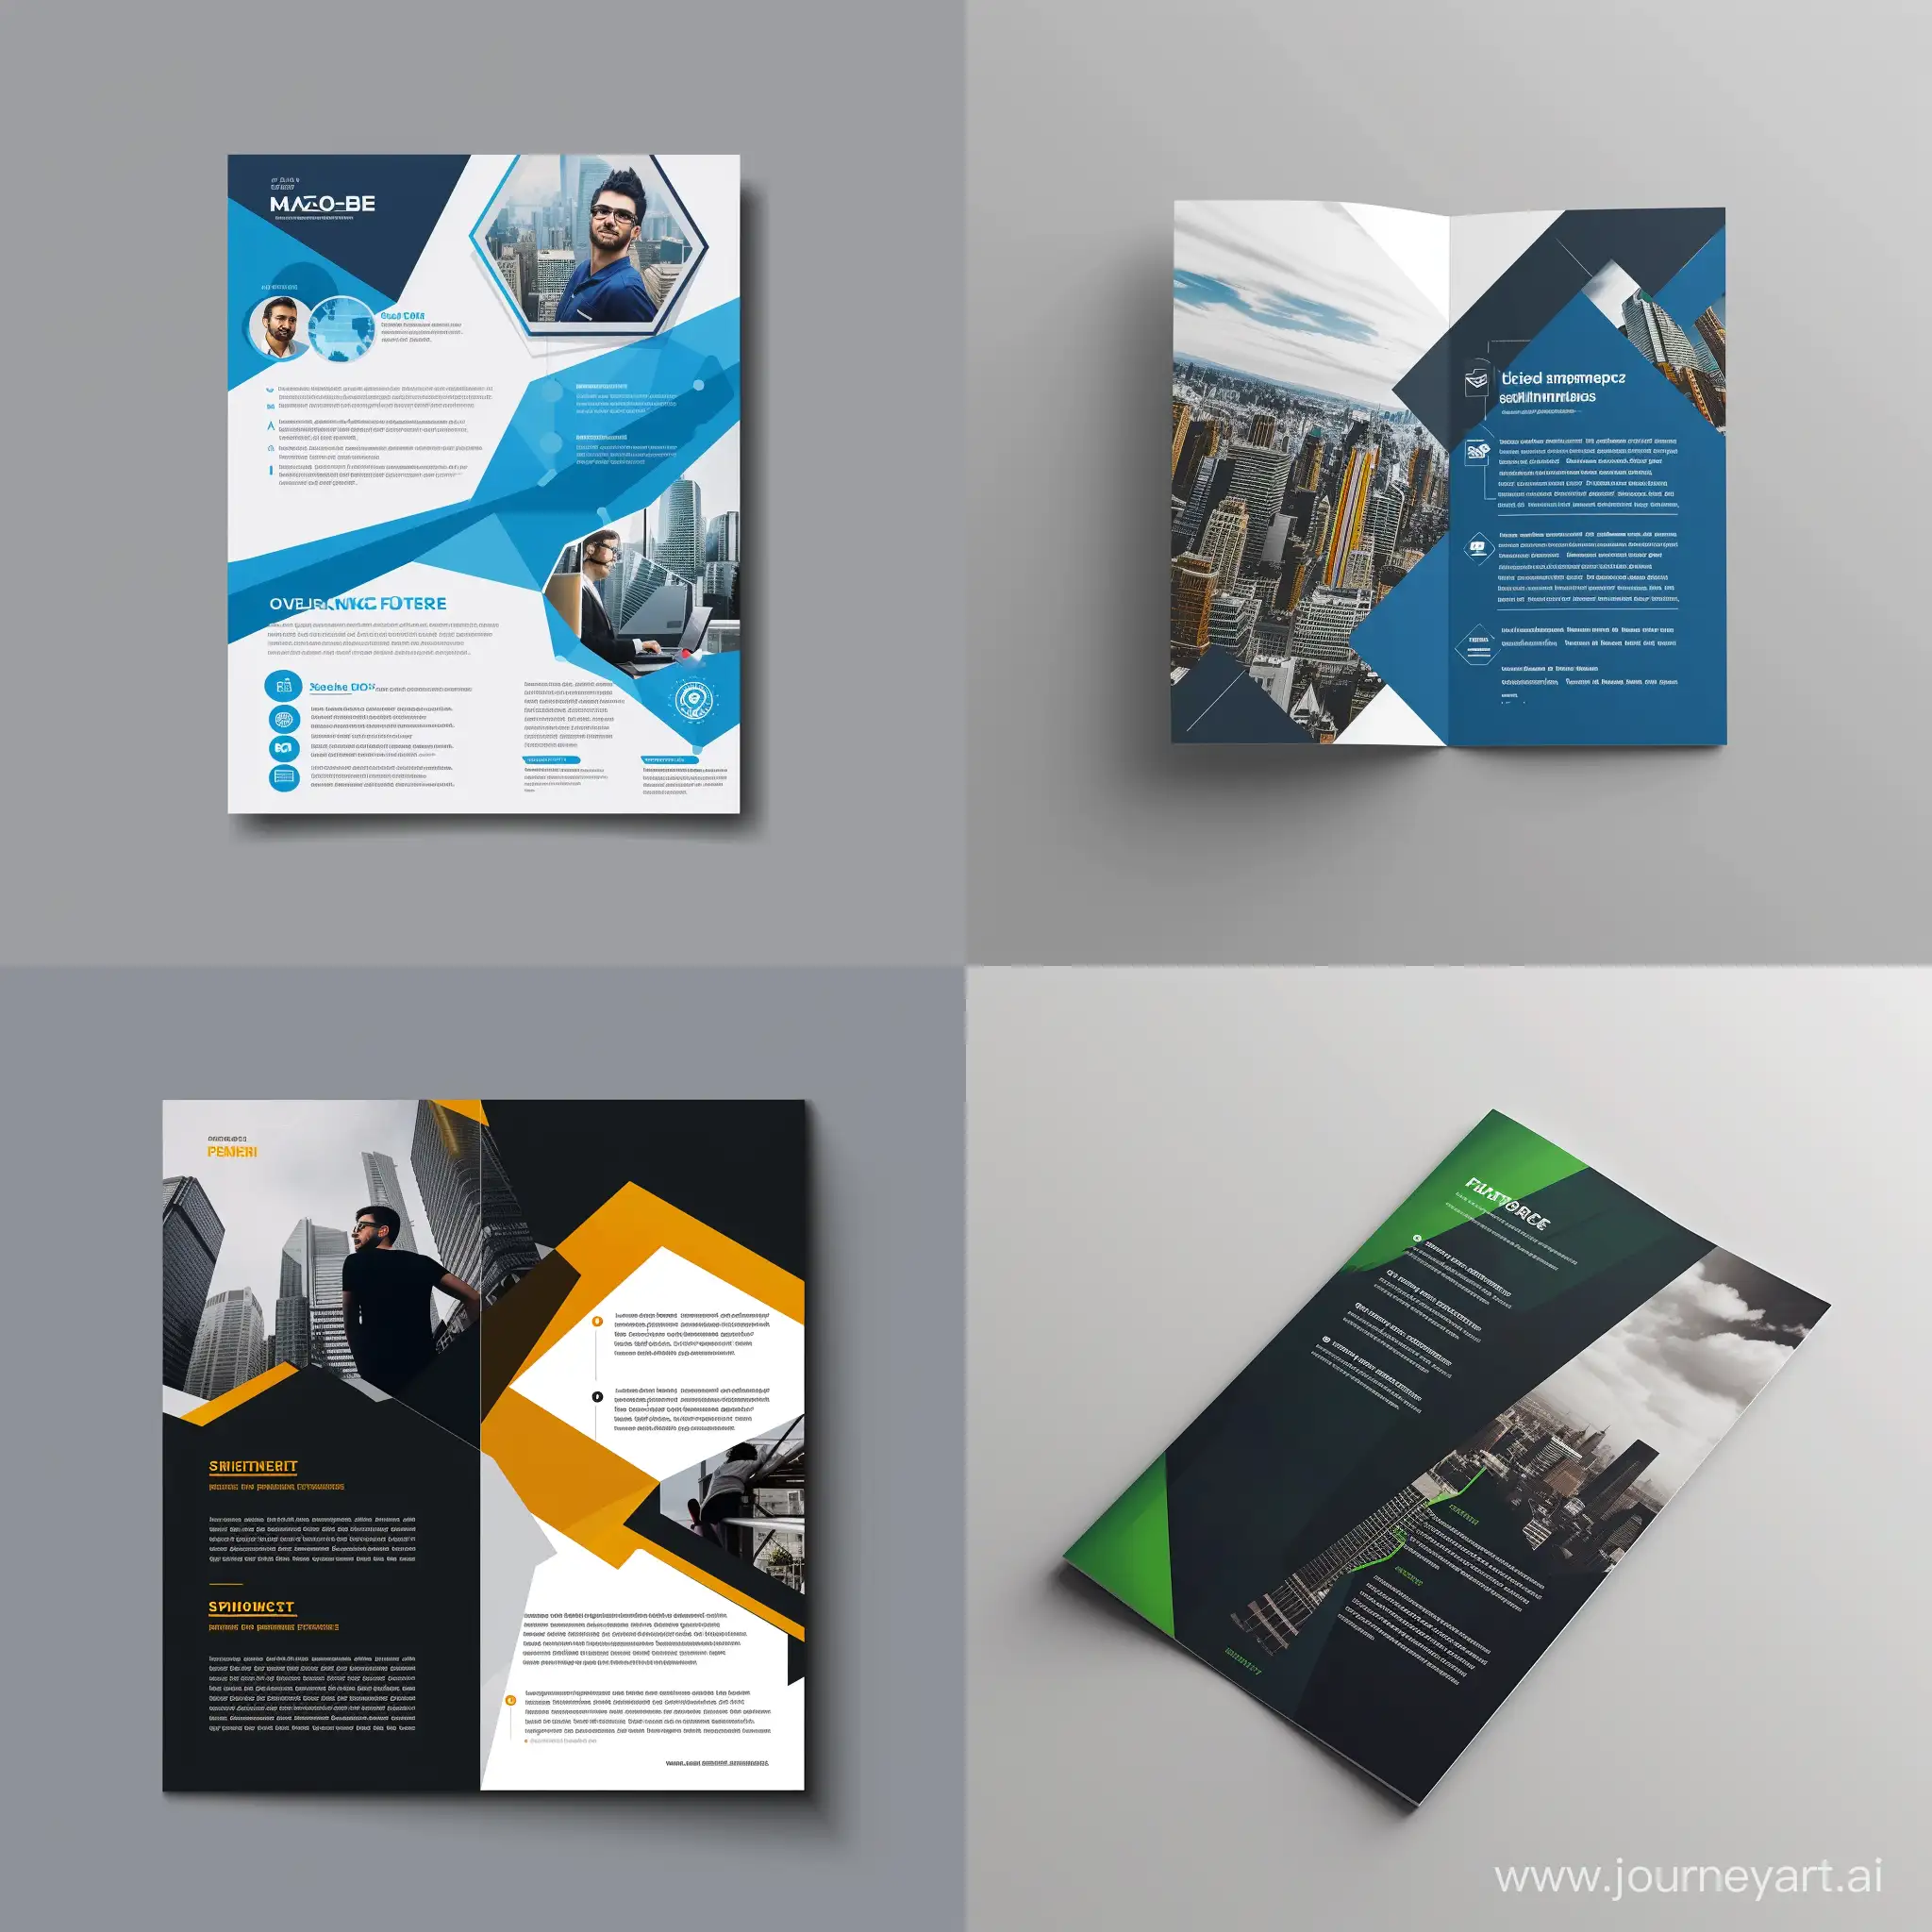 Creative-Brochure-Design-with-Versatile-Layout-and-Aspect-Ratio